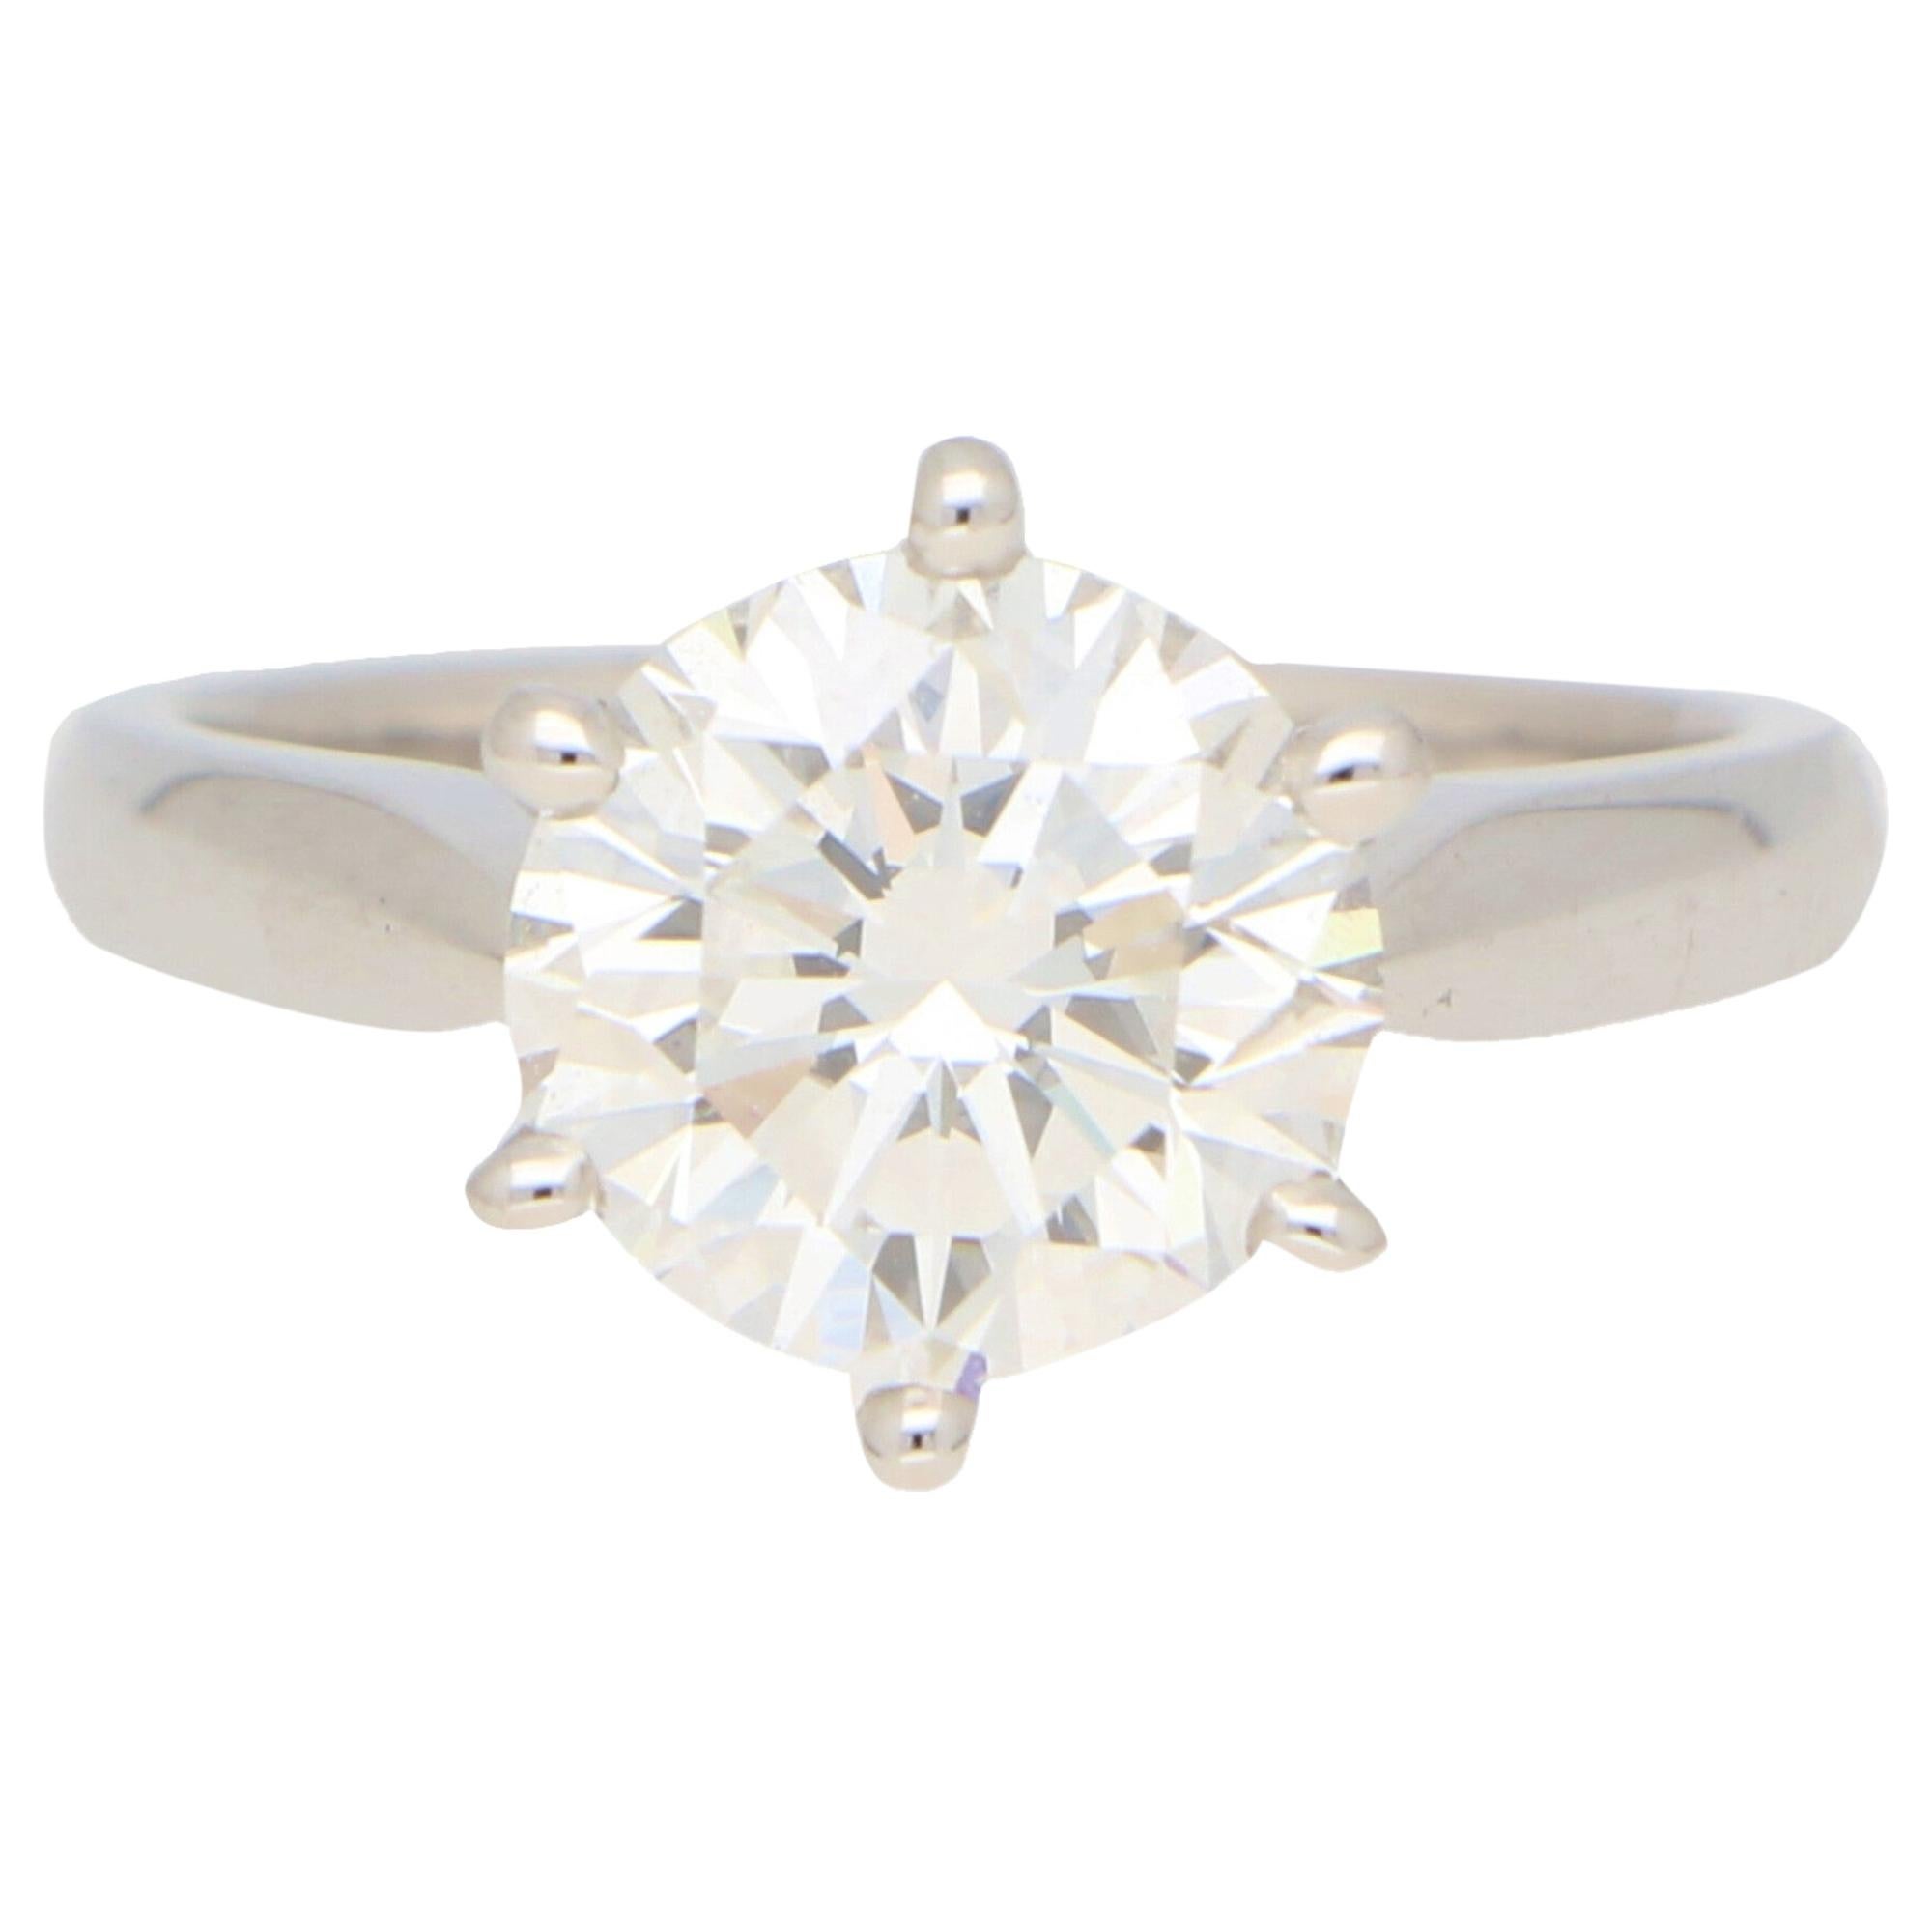 GIA Certified 3.02 Carat Round Brilliant Cut Diamond Ring in White Gold